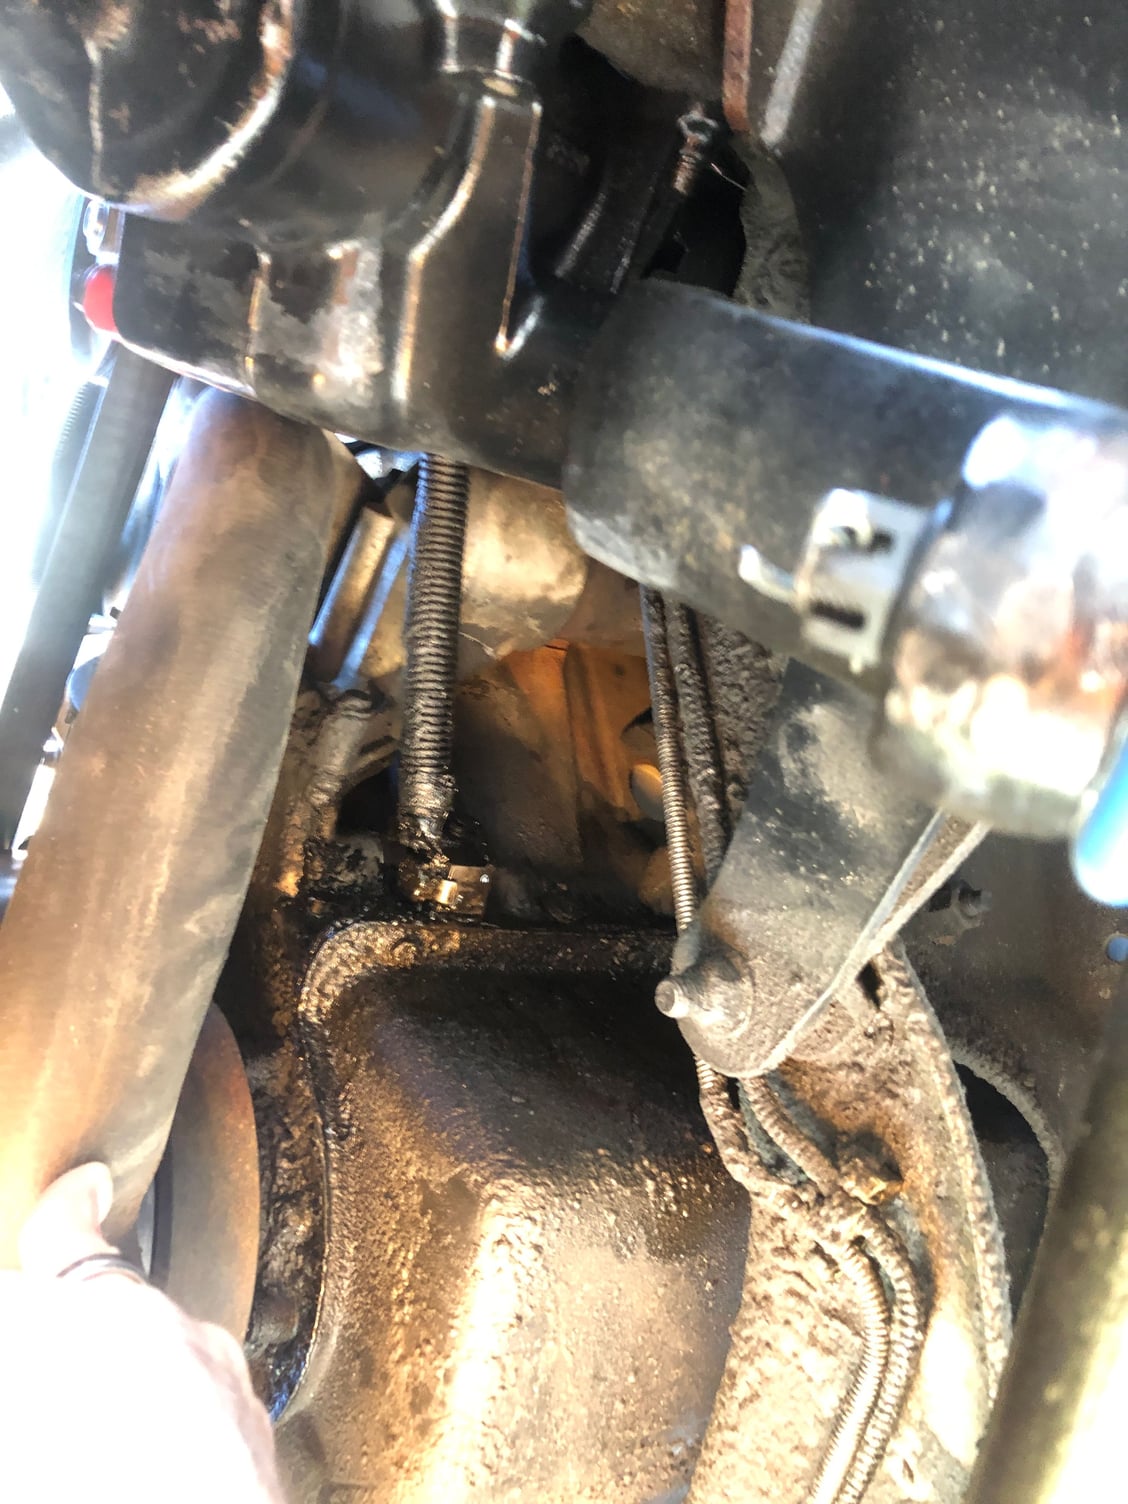 What is it - Oil leak front of engine: Pictures :) - Ford Truck 6.4 Powerstroke Oil Leak Front Of Engine